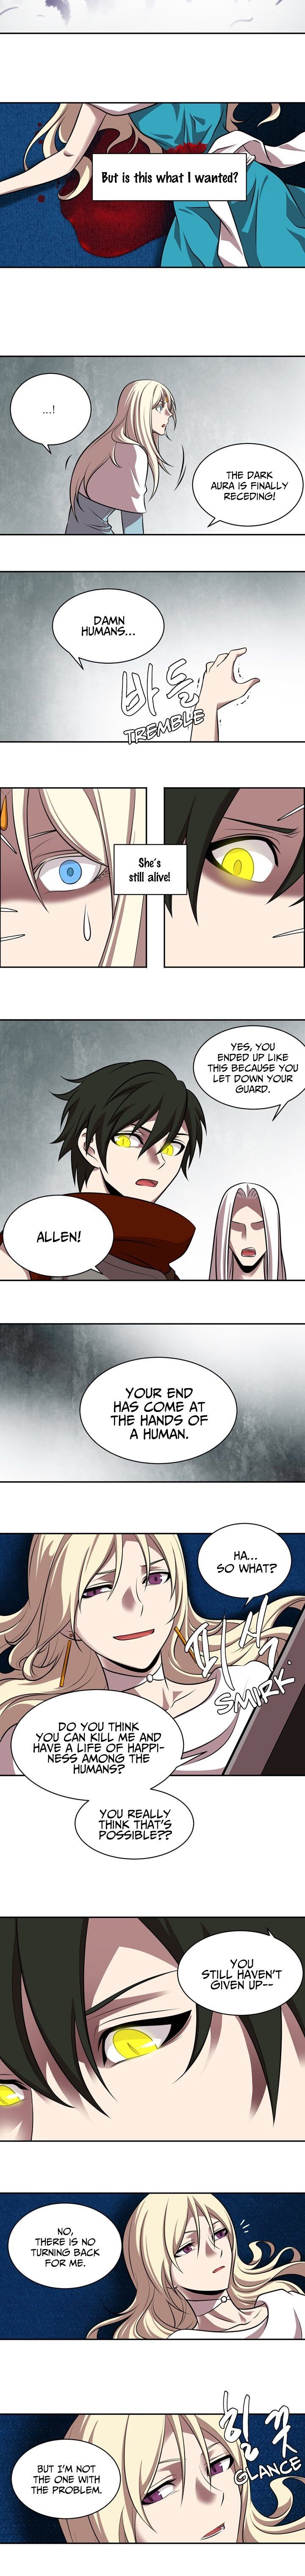 Sword And Magic: The Waking Hero - Page 3